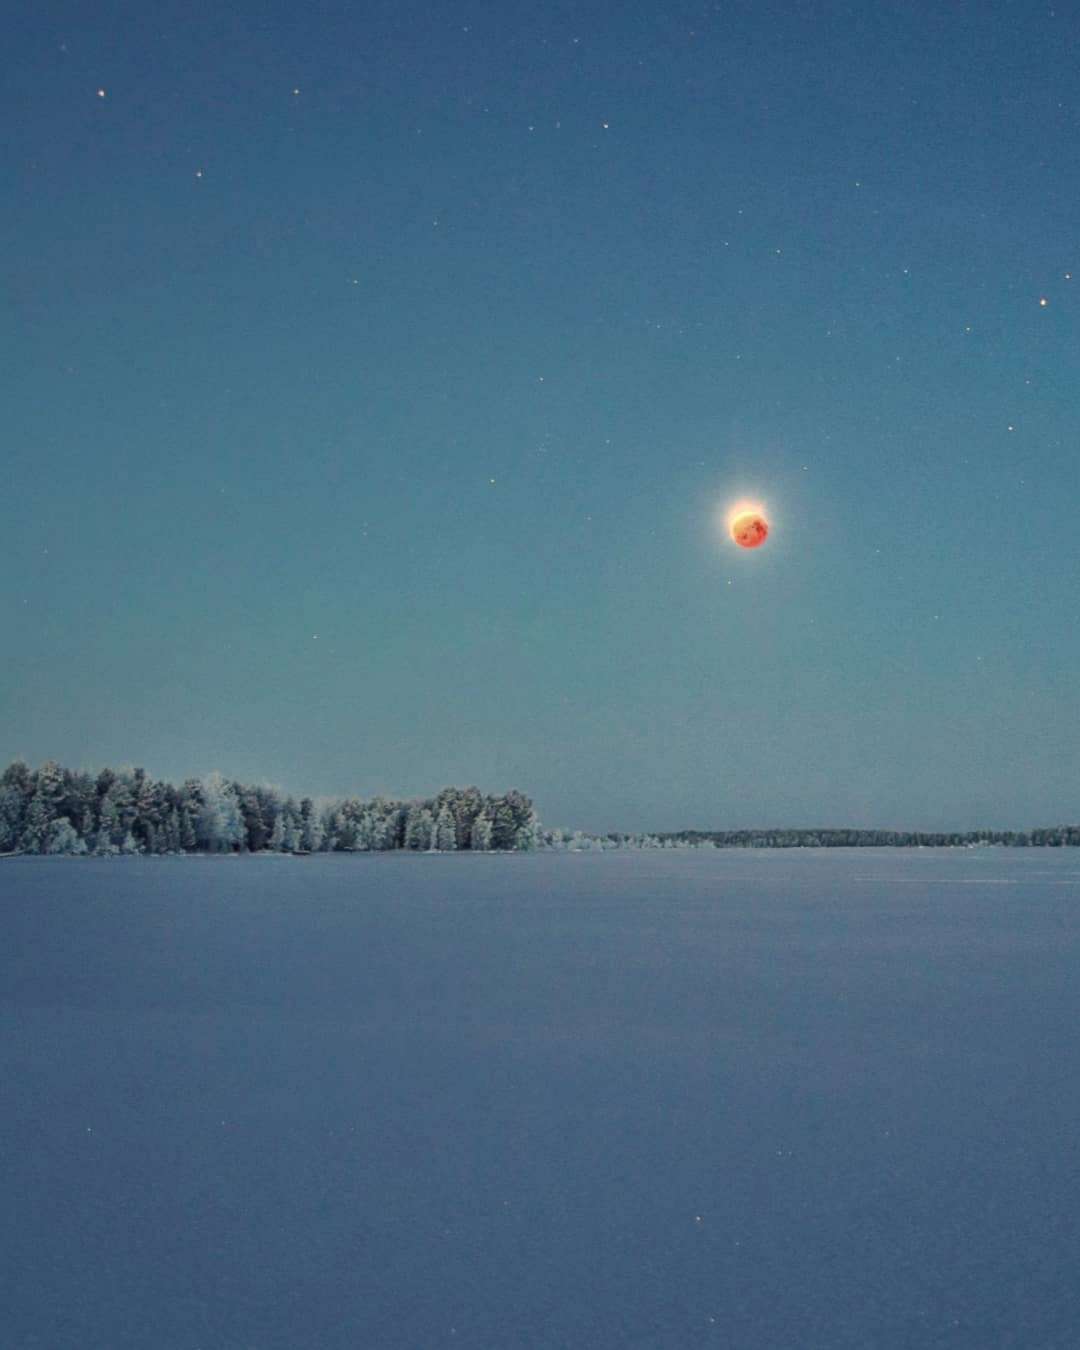 PHOTO: Hannahbel Nel captured this image of the moon during the eclipse over a frozen lake from Lapland.